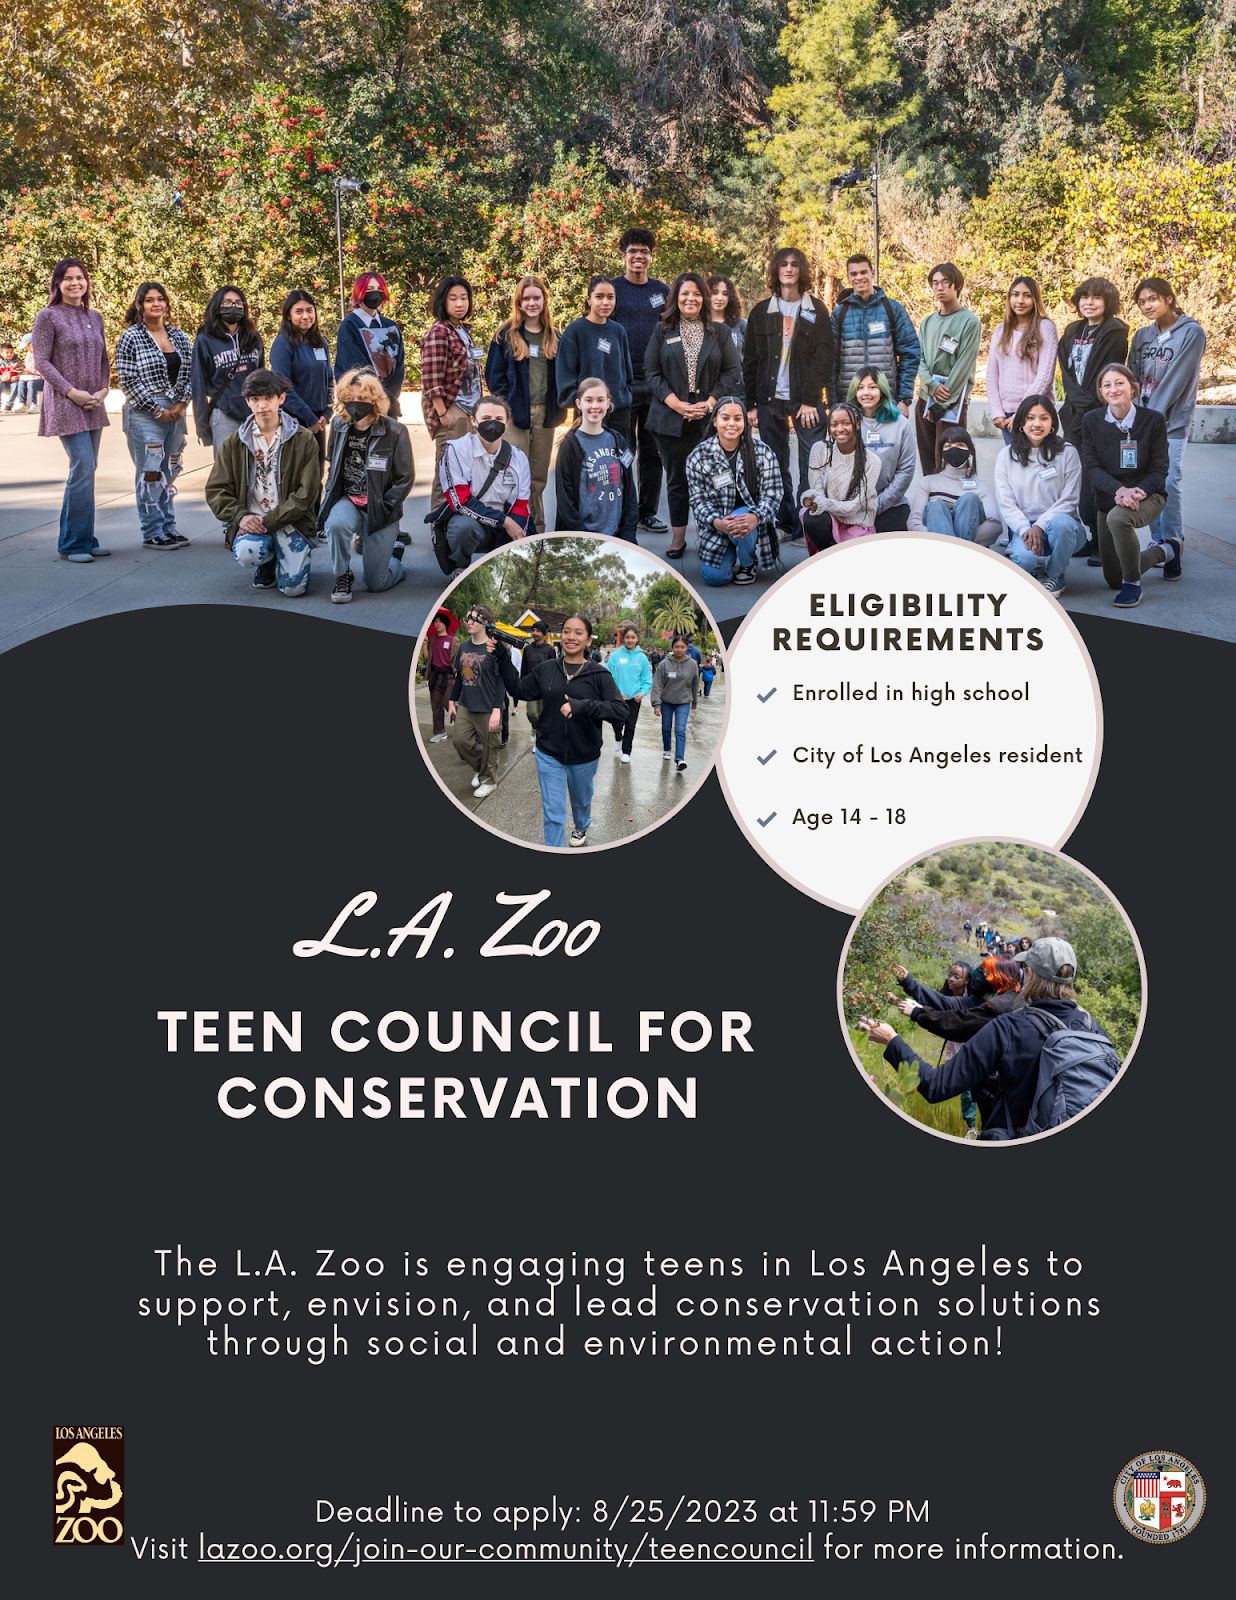 L.A. Zoo - Teen Council for Conservation